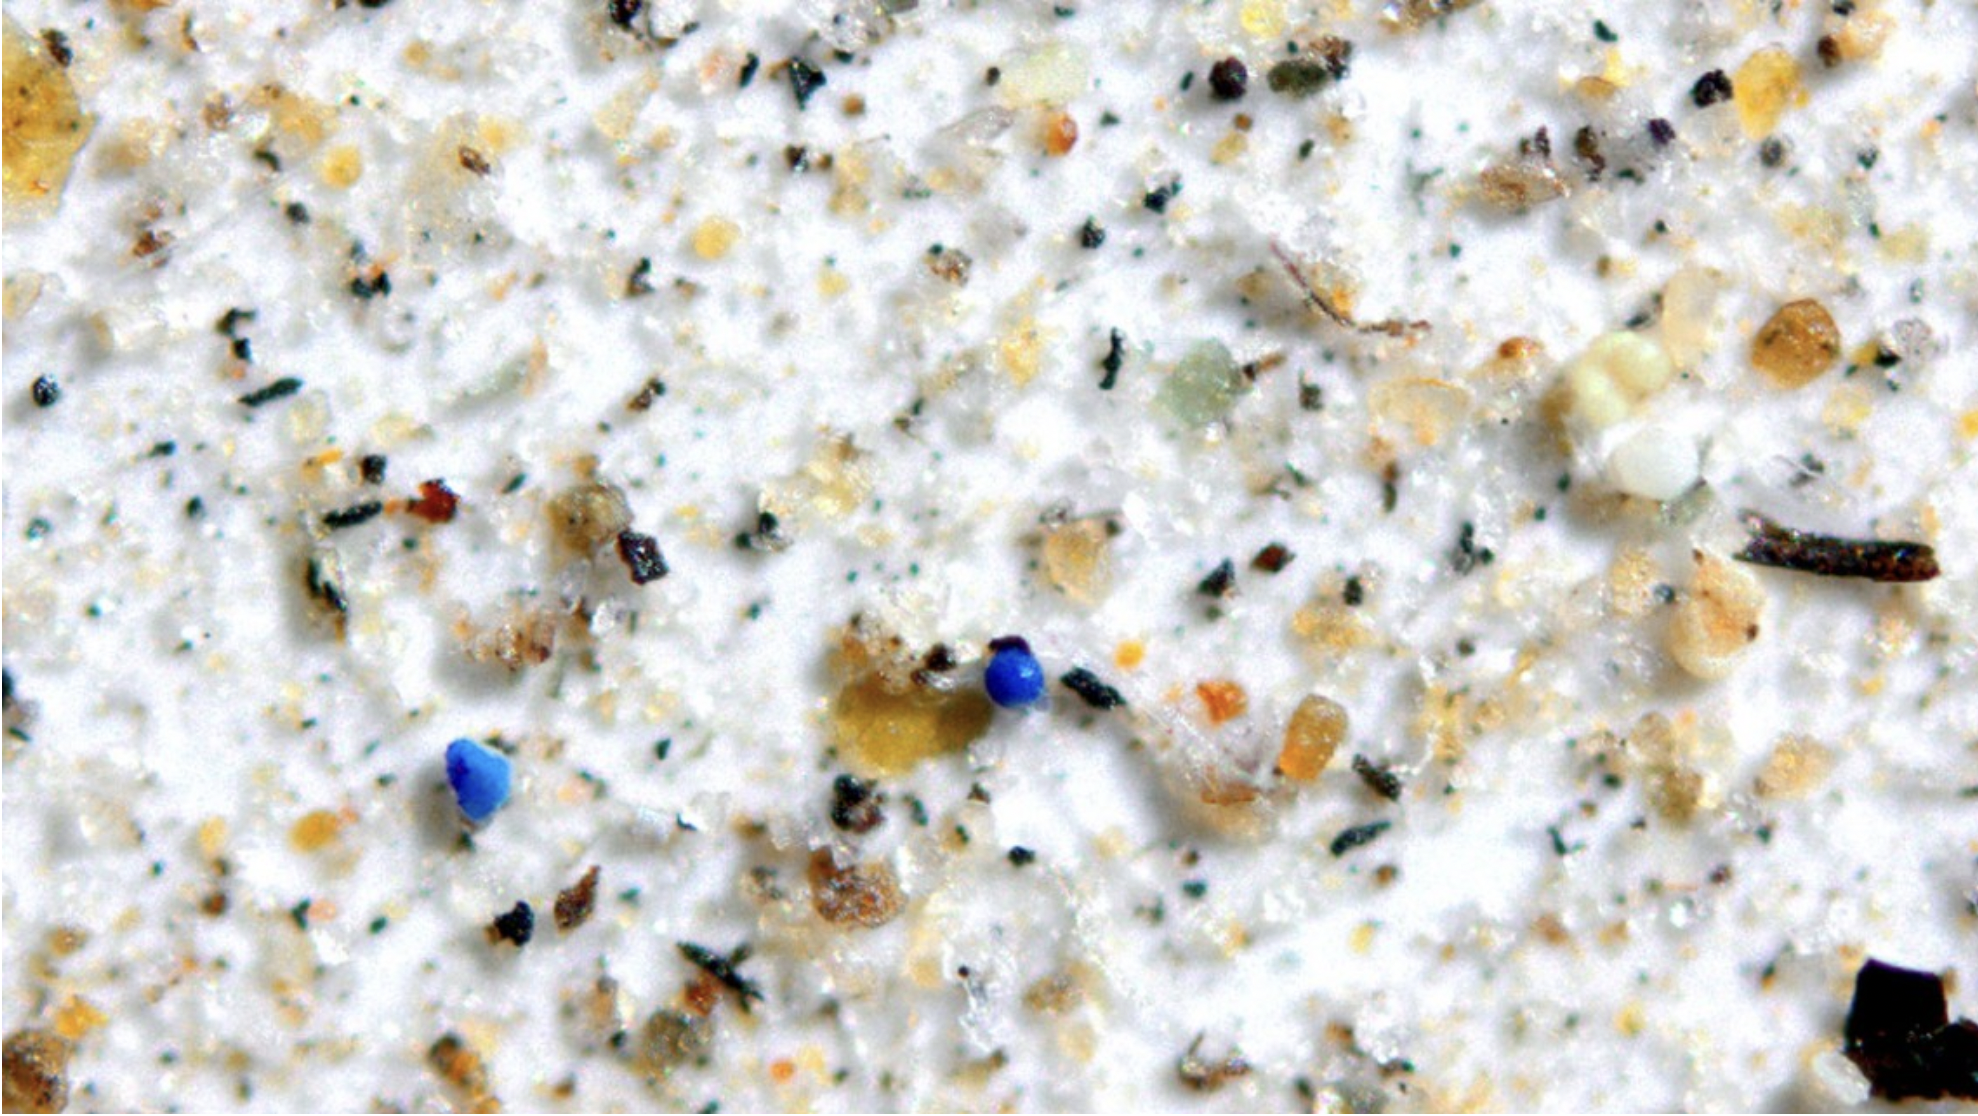 Microscopic view of dust particle containing plastic